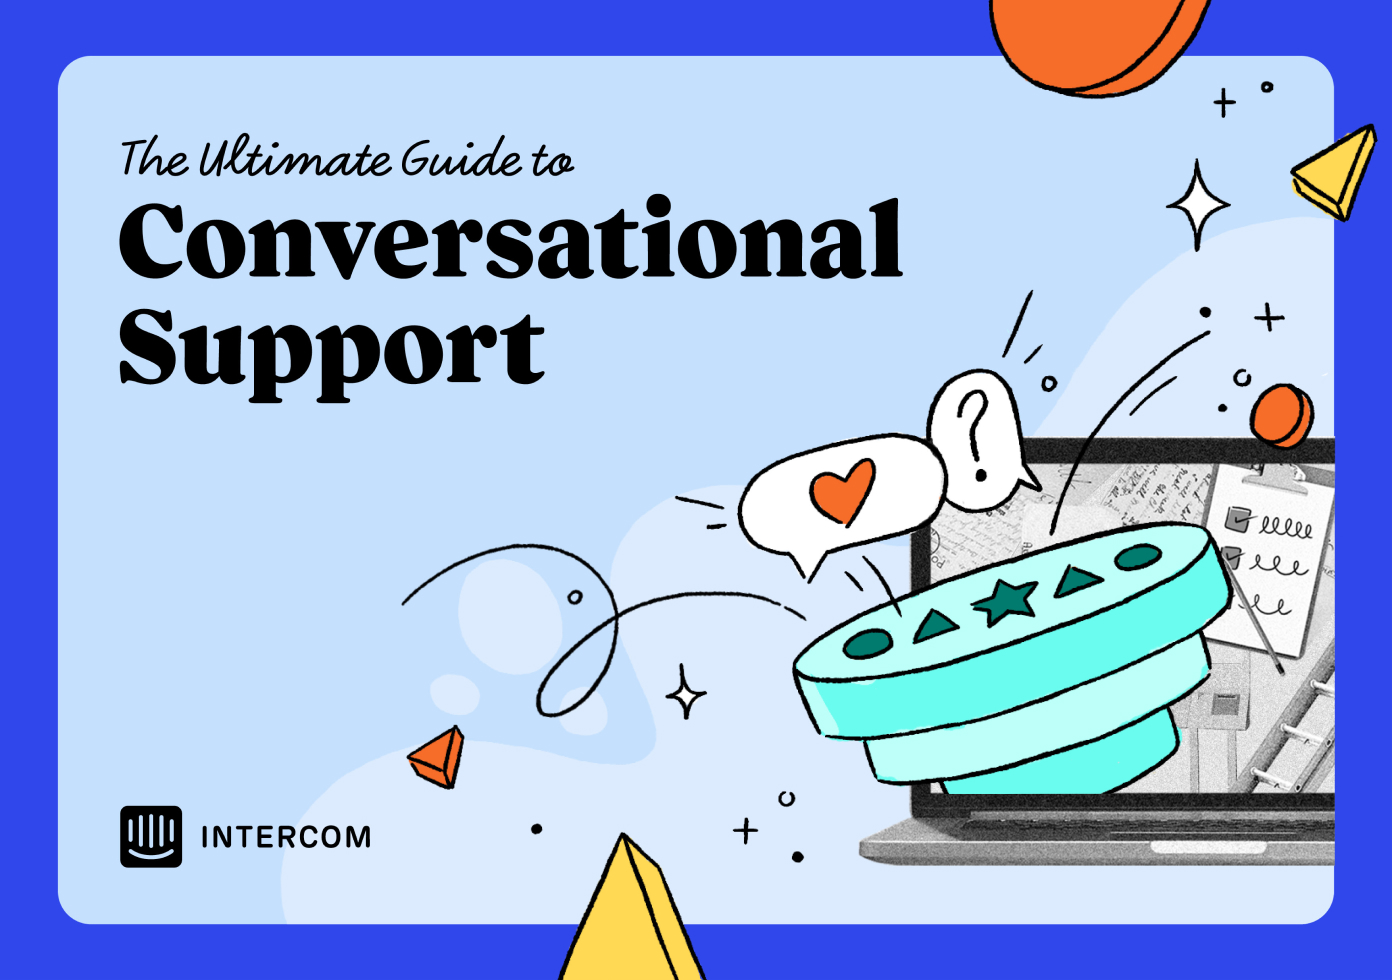 The Ultimate Guide to Conversational Support